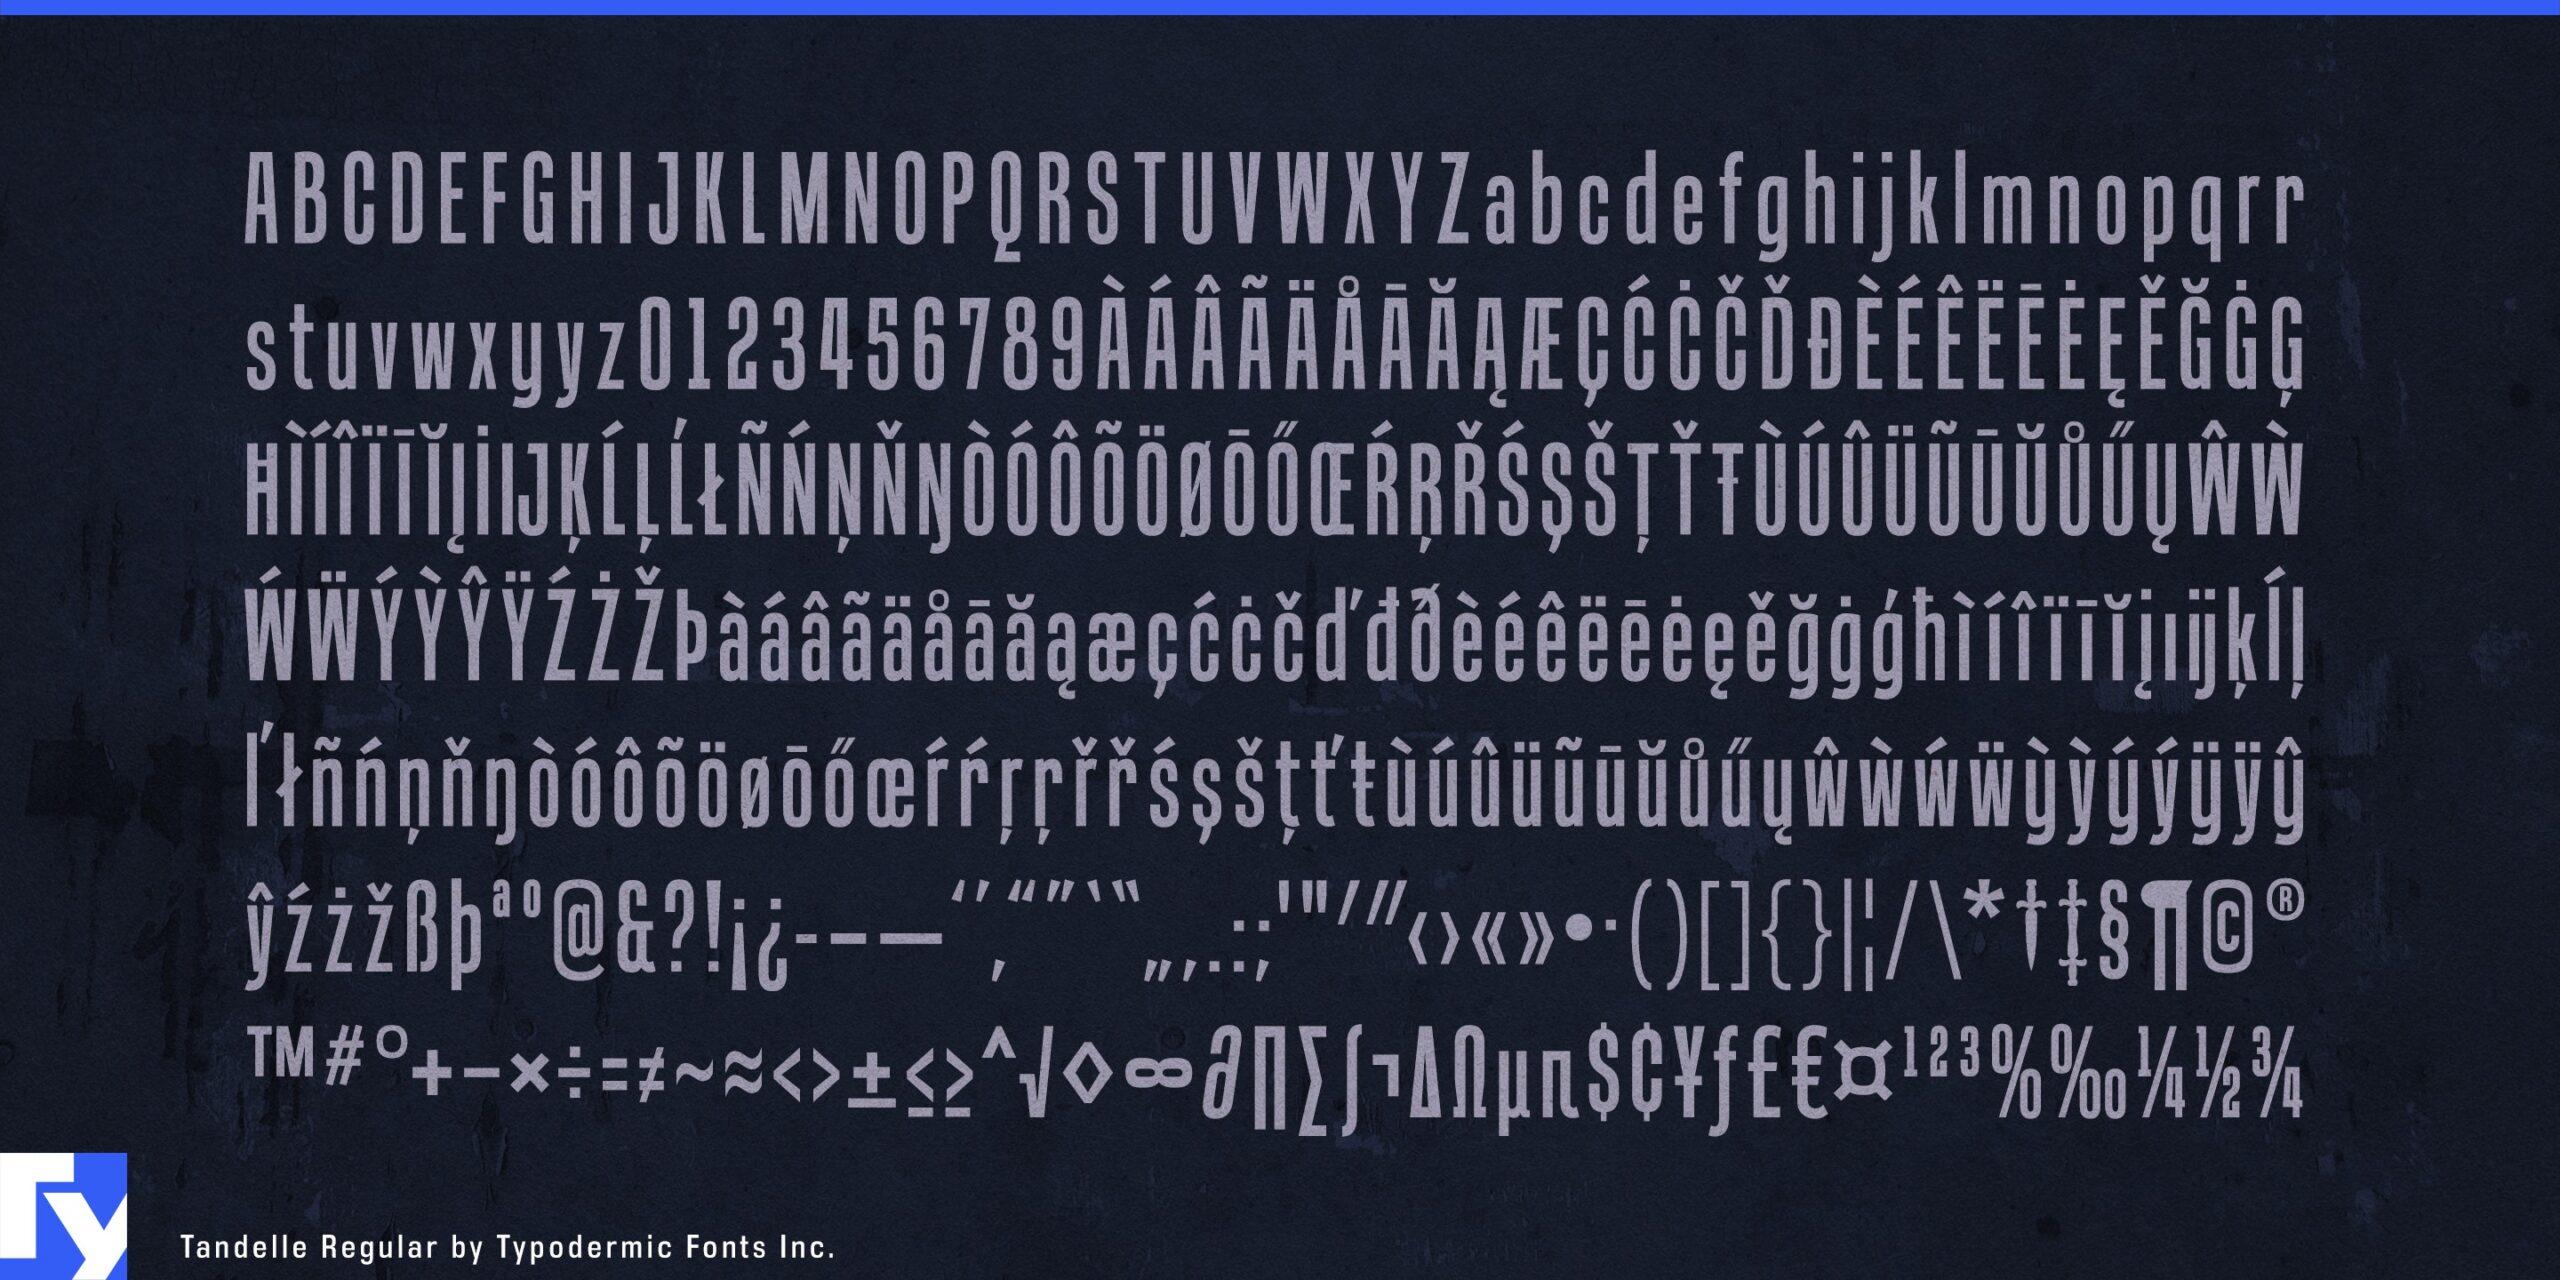 Discover the visually appealing narrow letterforms of Tandelle in action.